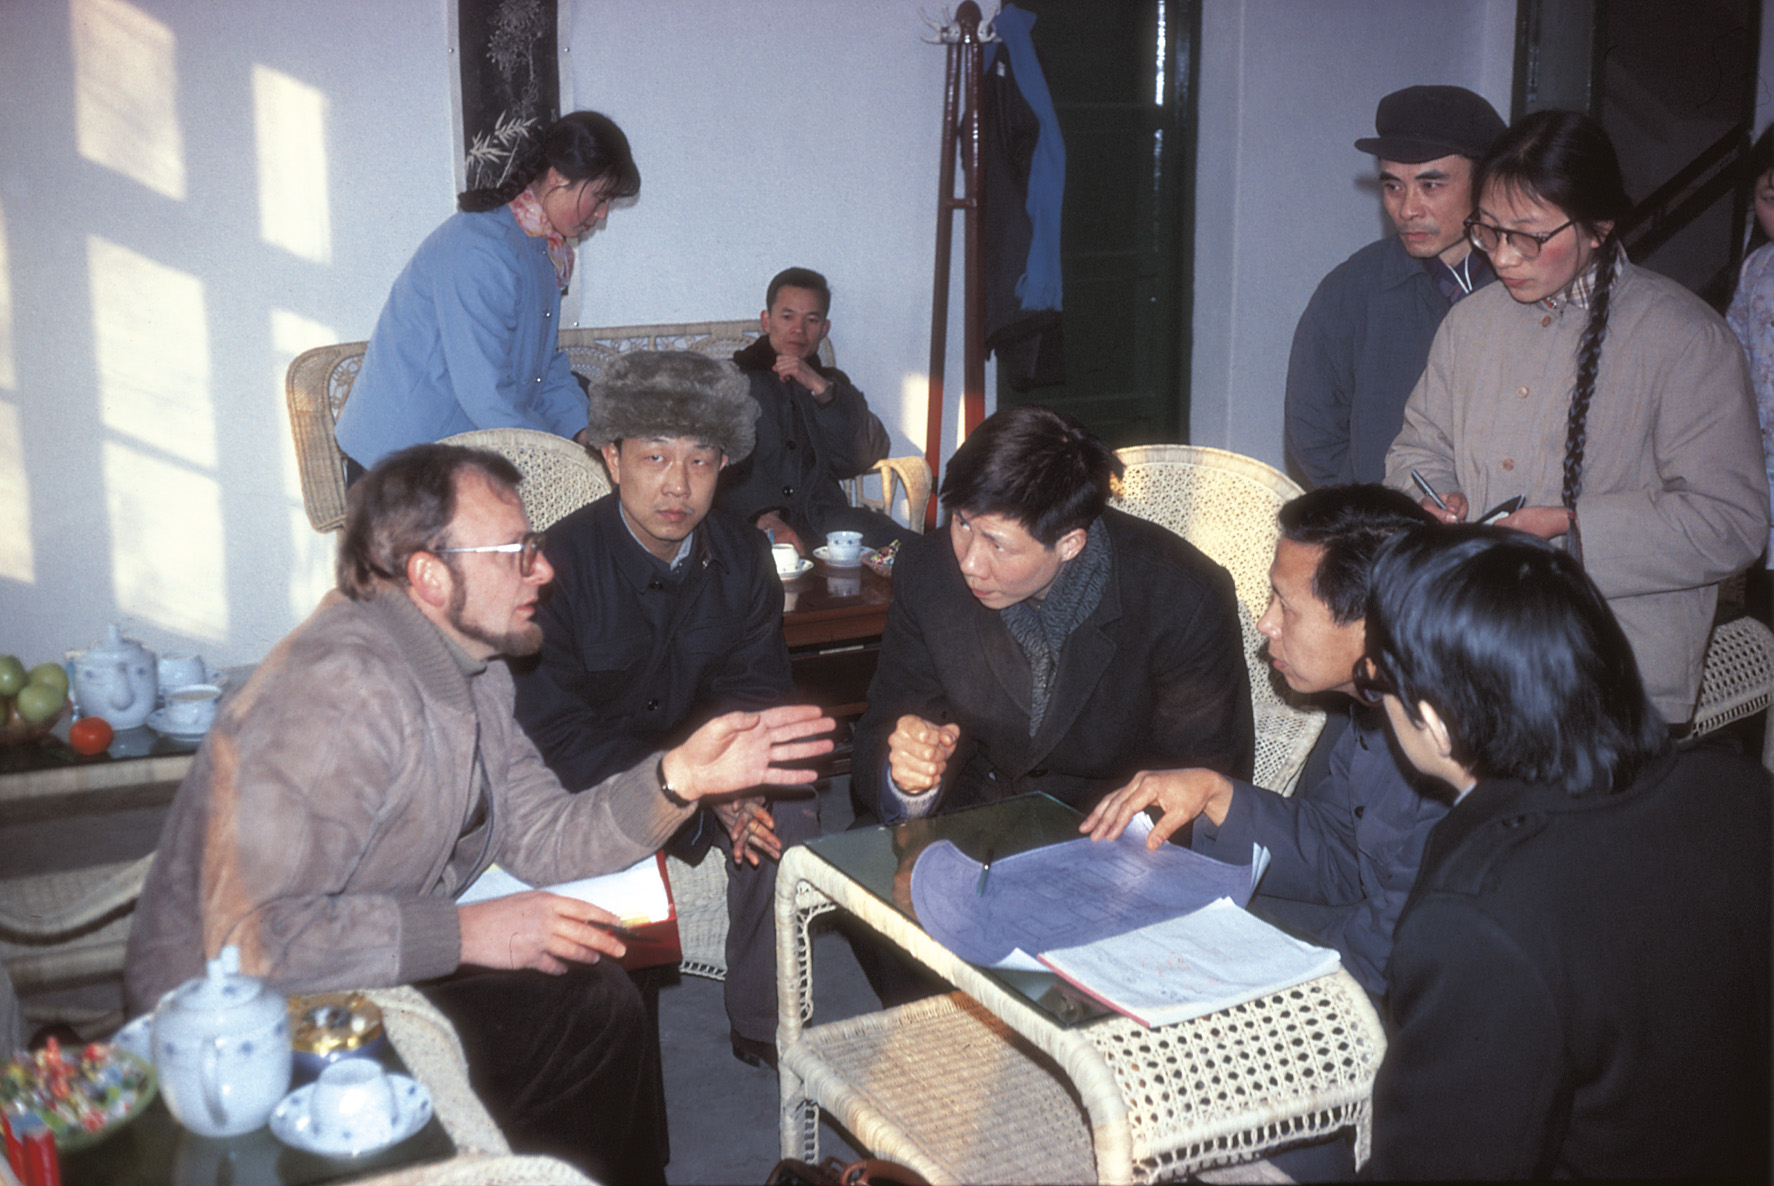 1. Joos Horsten first meeting in China